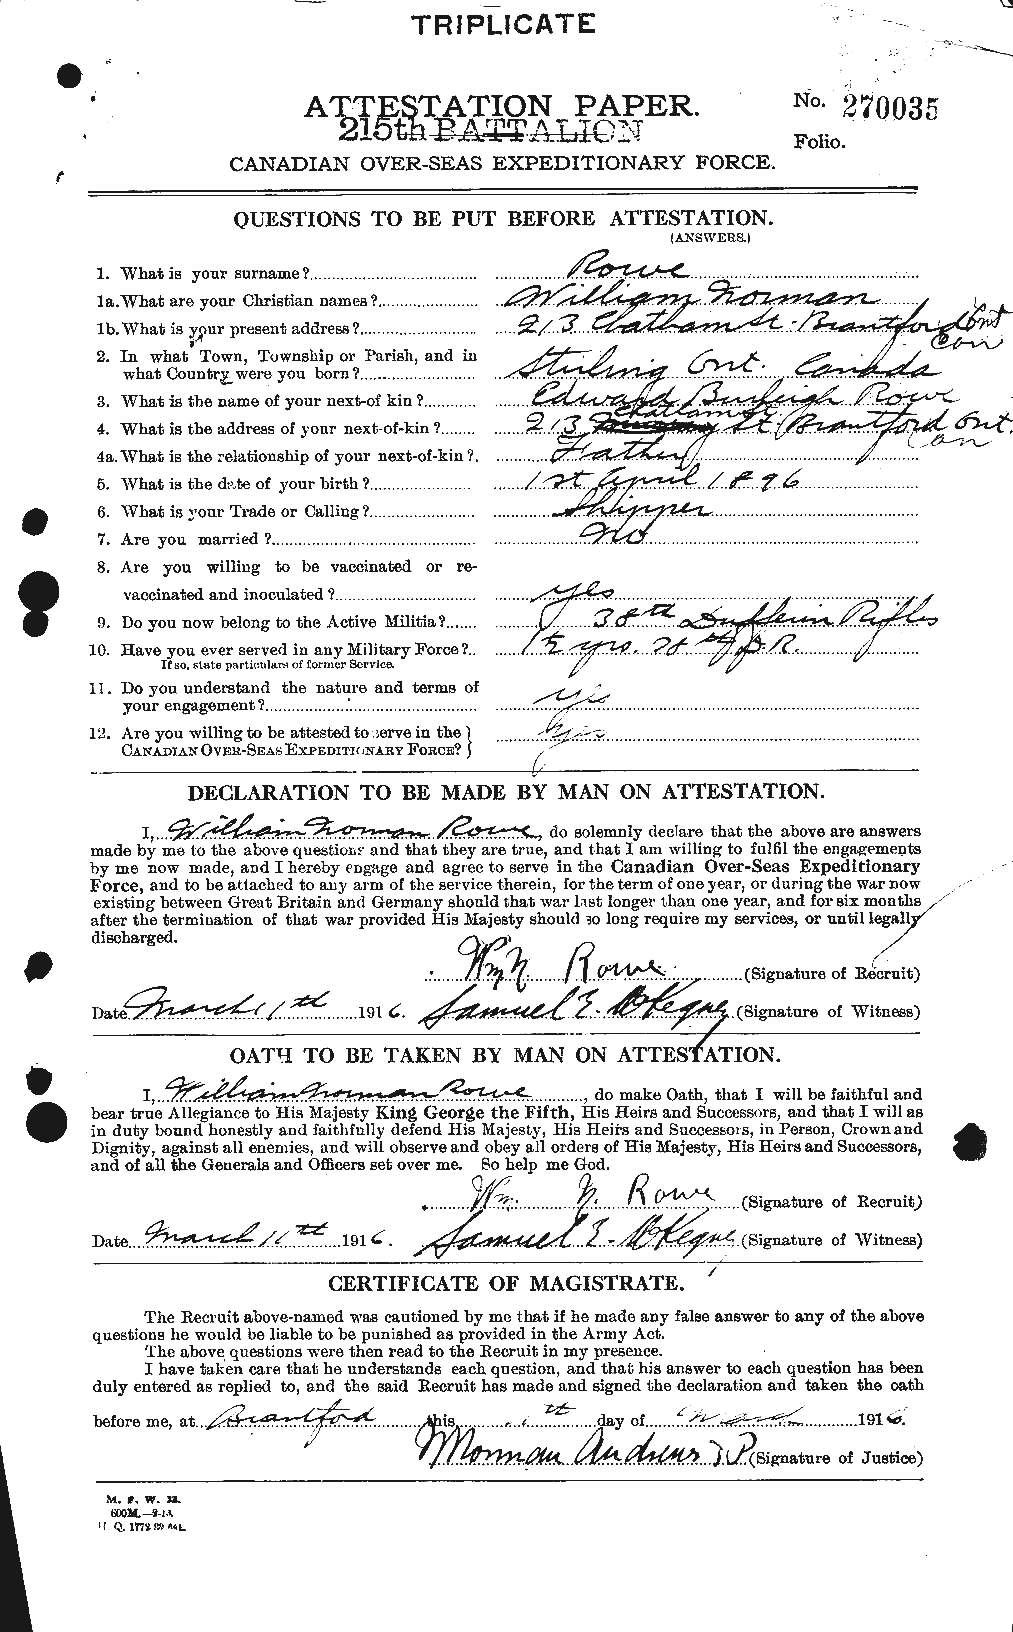 Personnel Records of the First World War - CEF 616041a